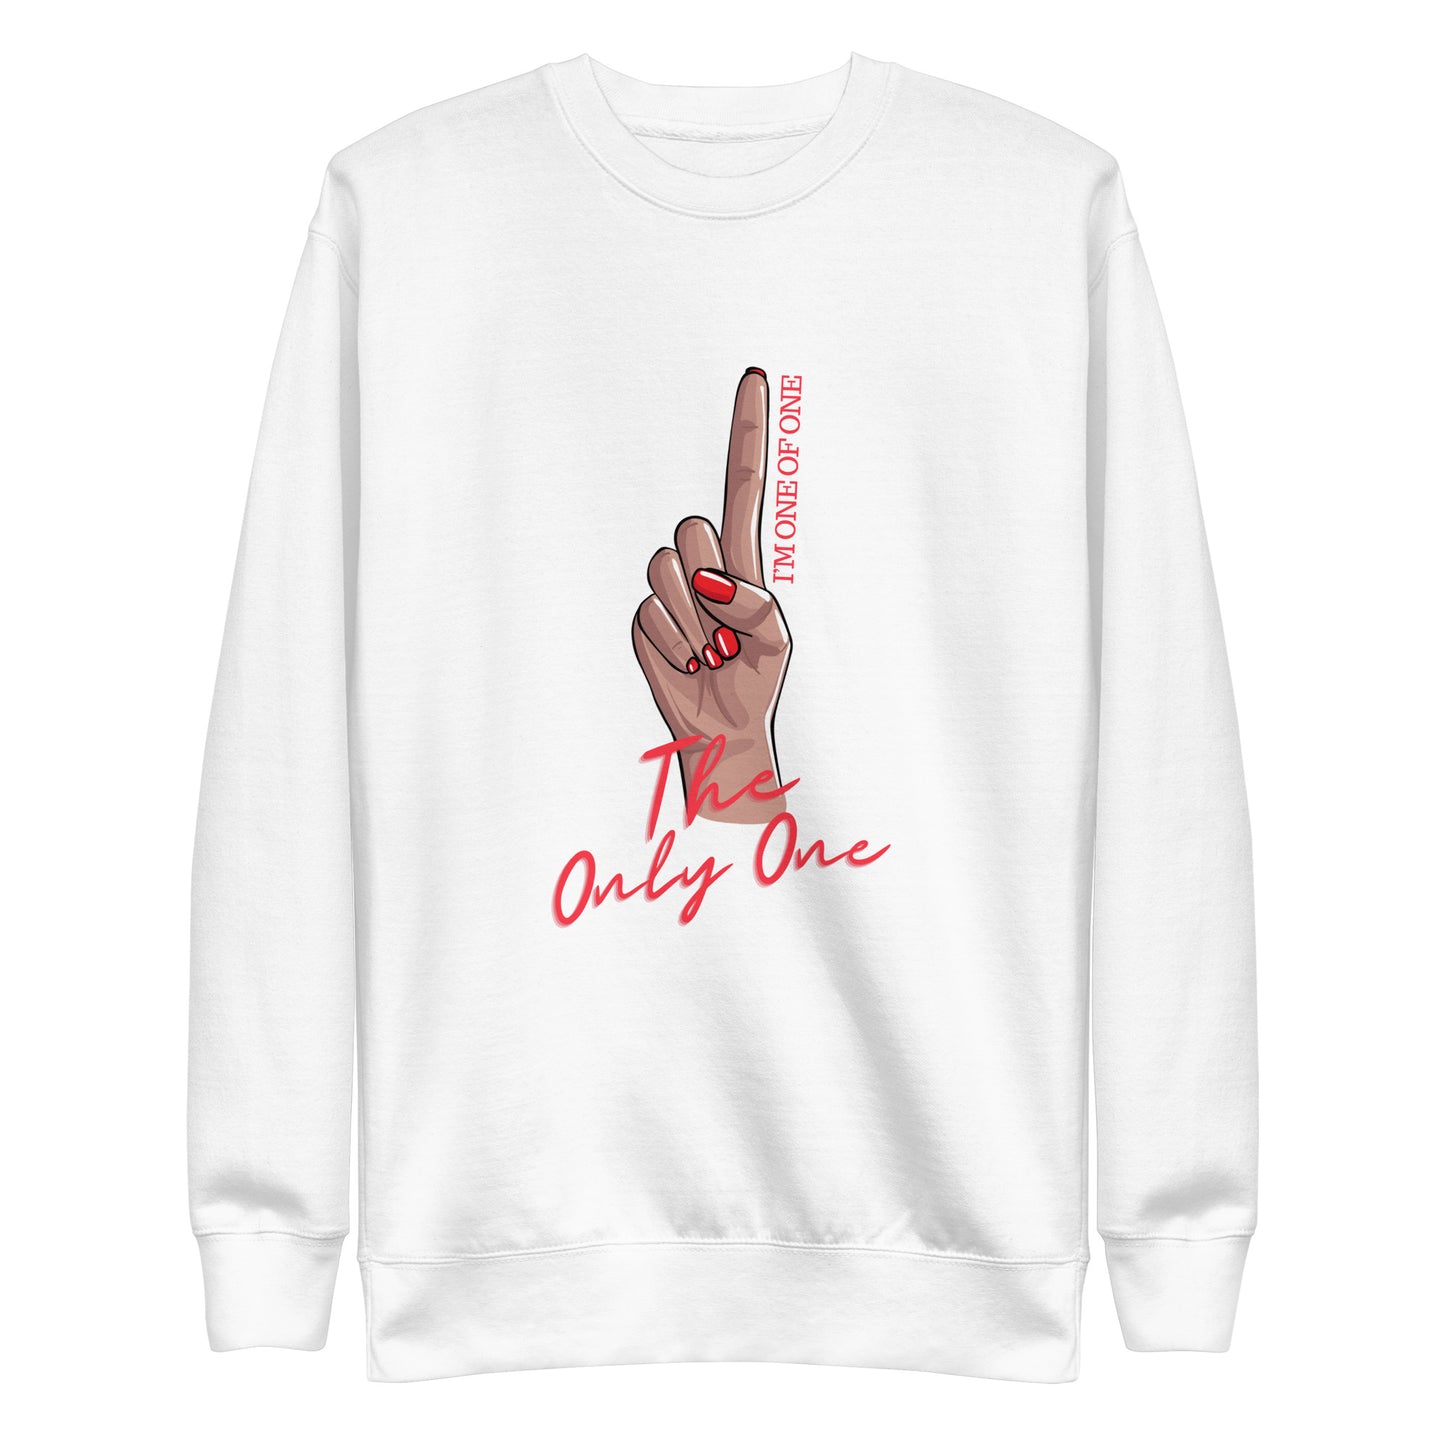 The Only One Sweatshirt